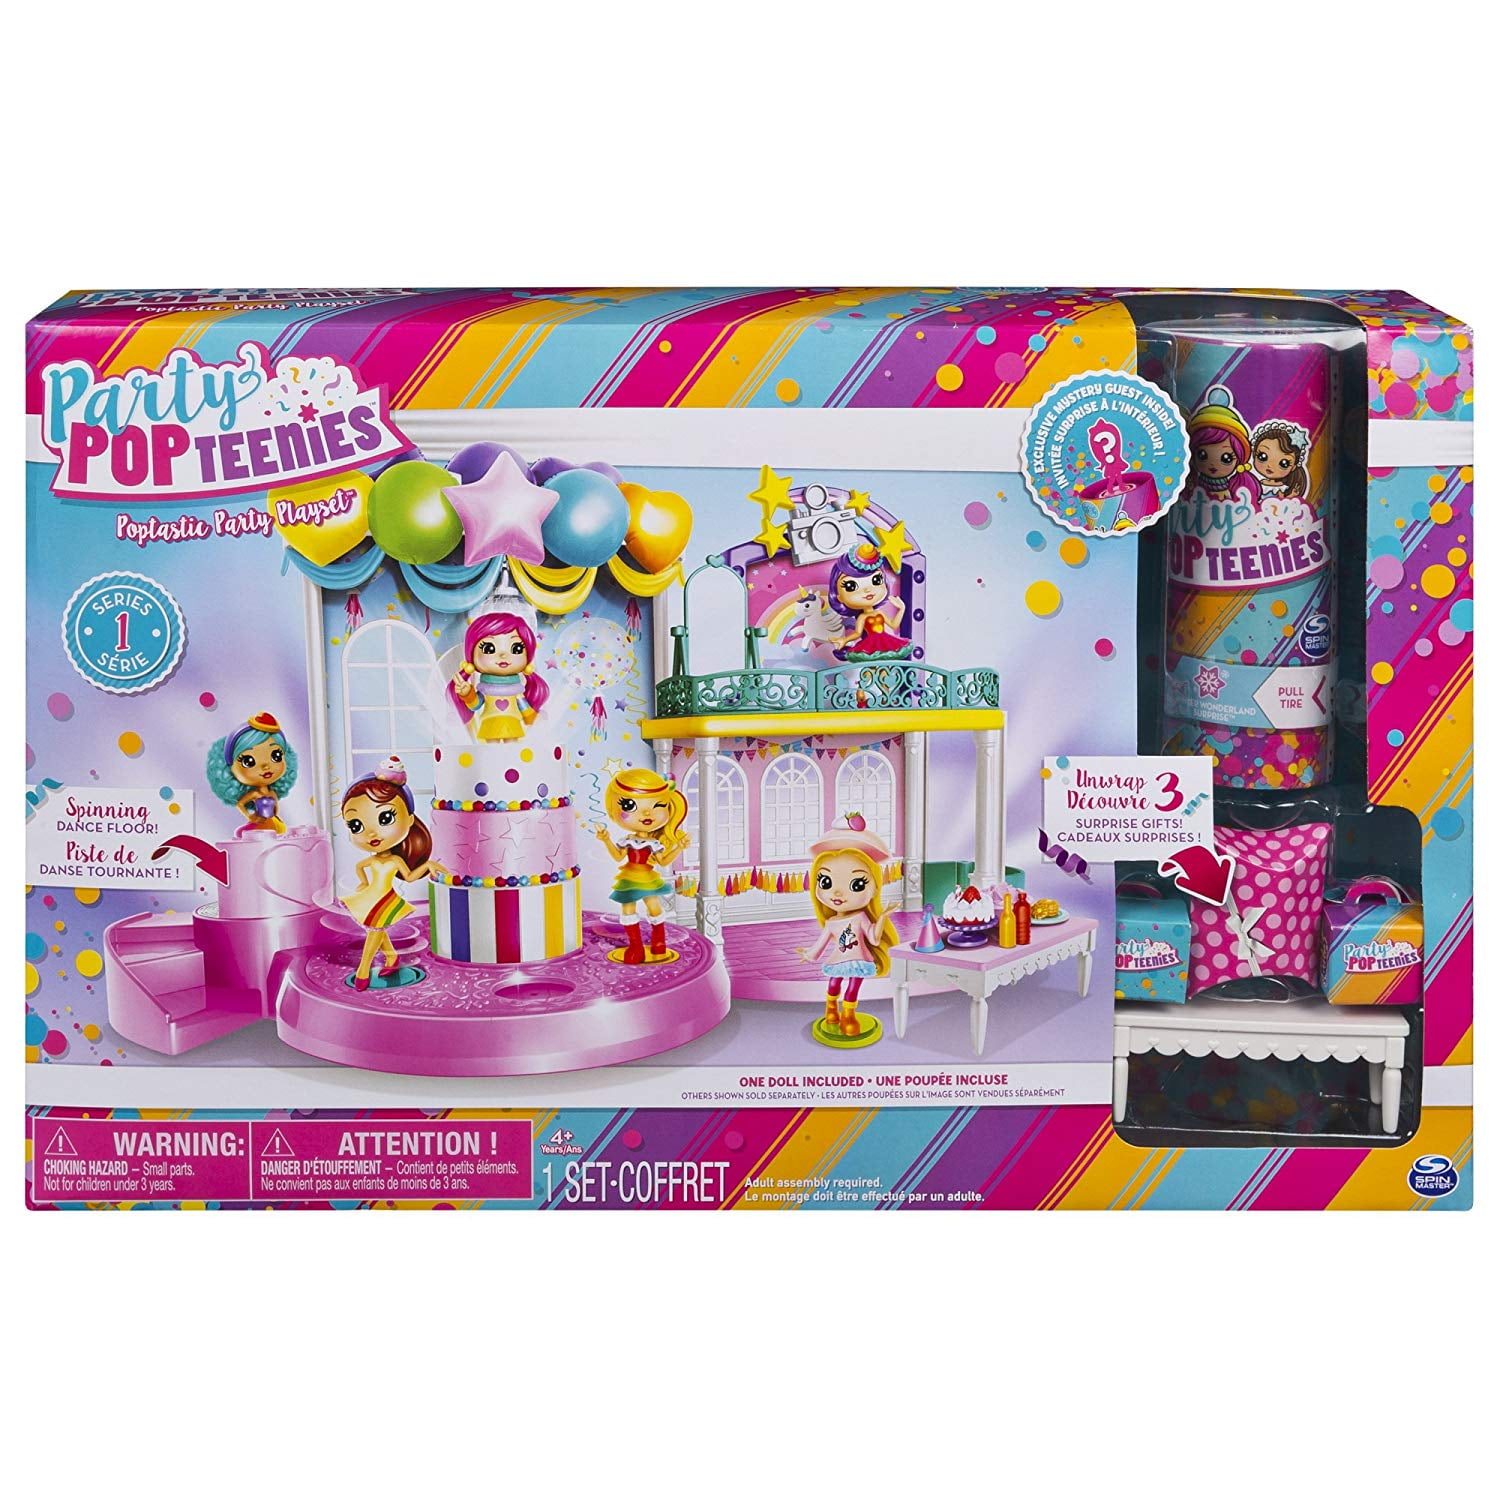 PARTY POPTEENIES PARTY SURPRISE BOX PLAYSET NEW 